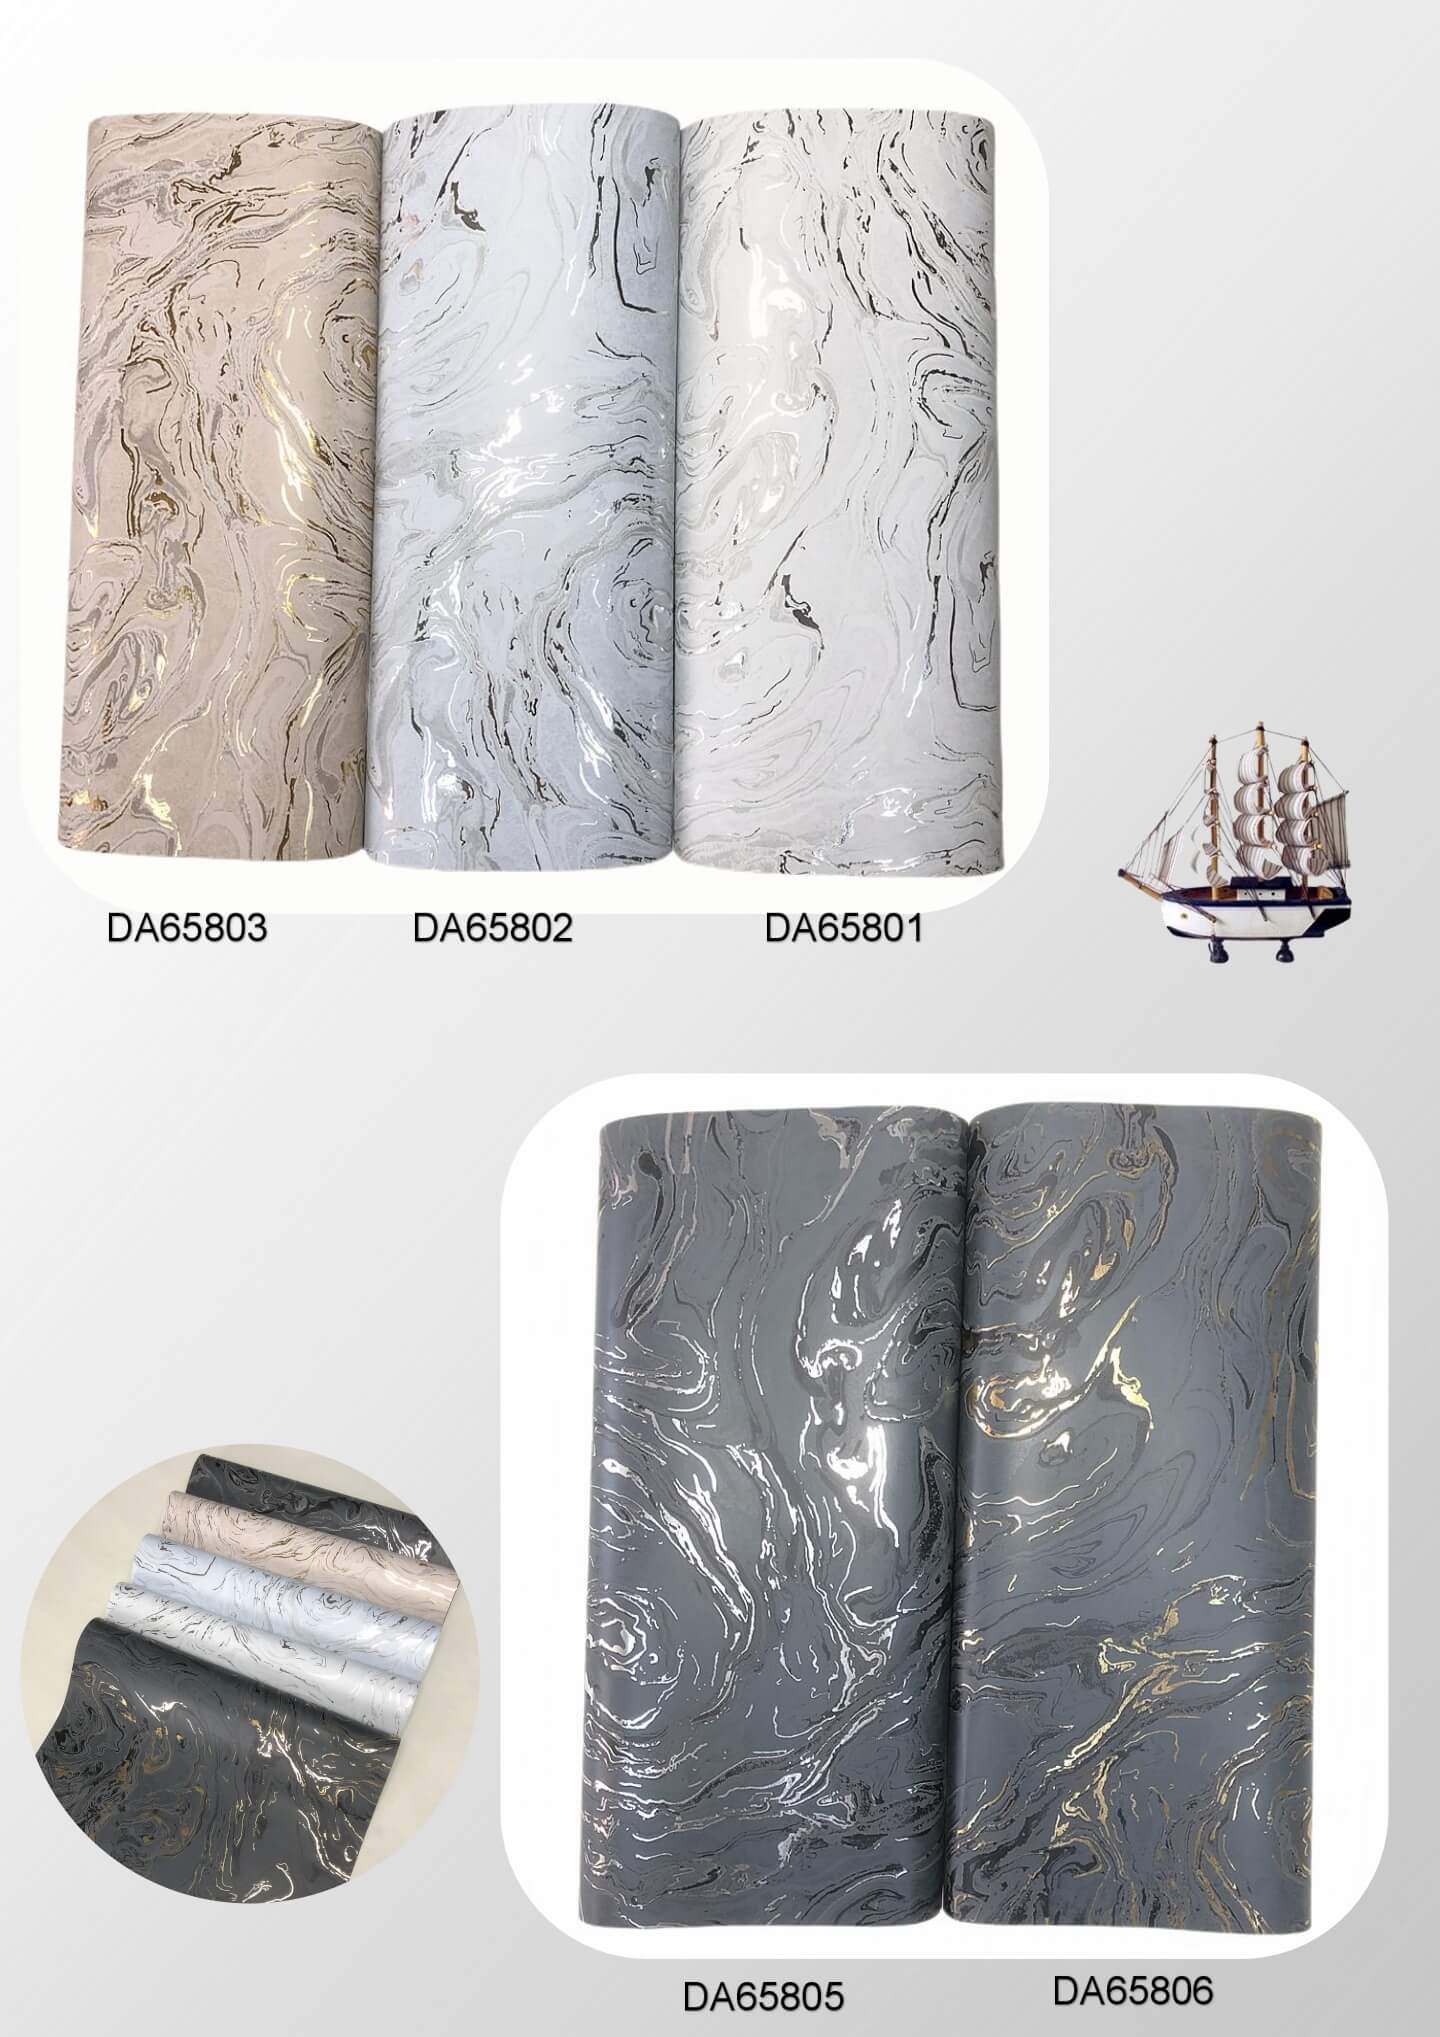 3D Metallic Wallpaper Wallcoverings For Home Hotel Wall Decoration (1)